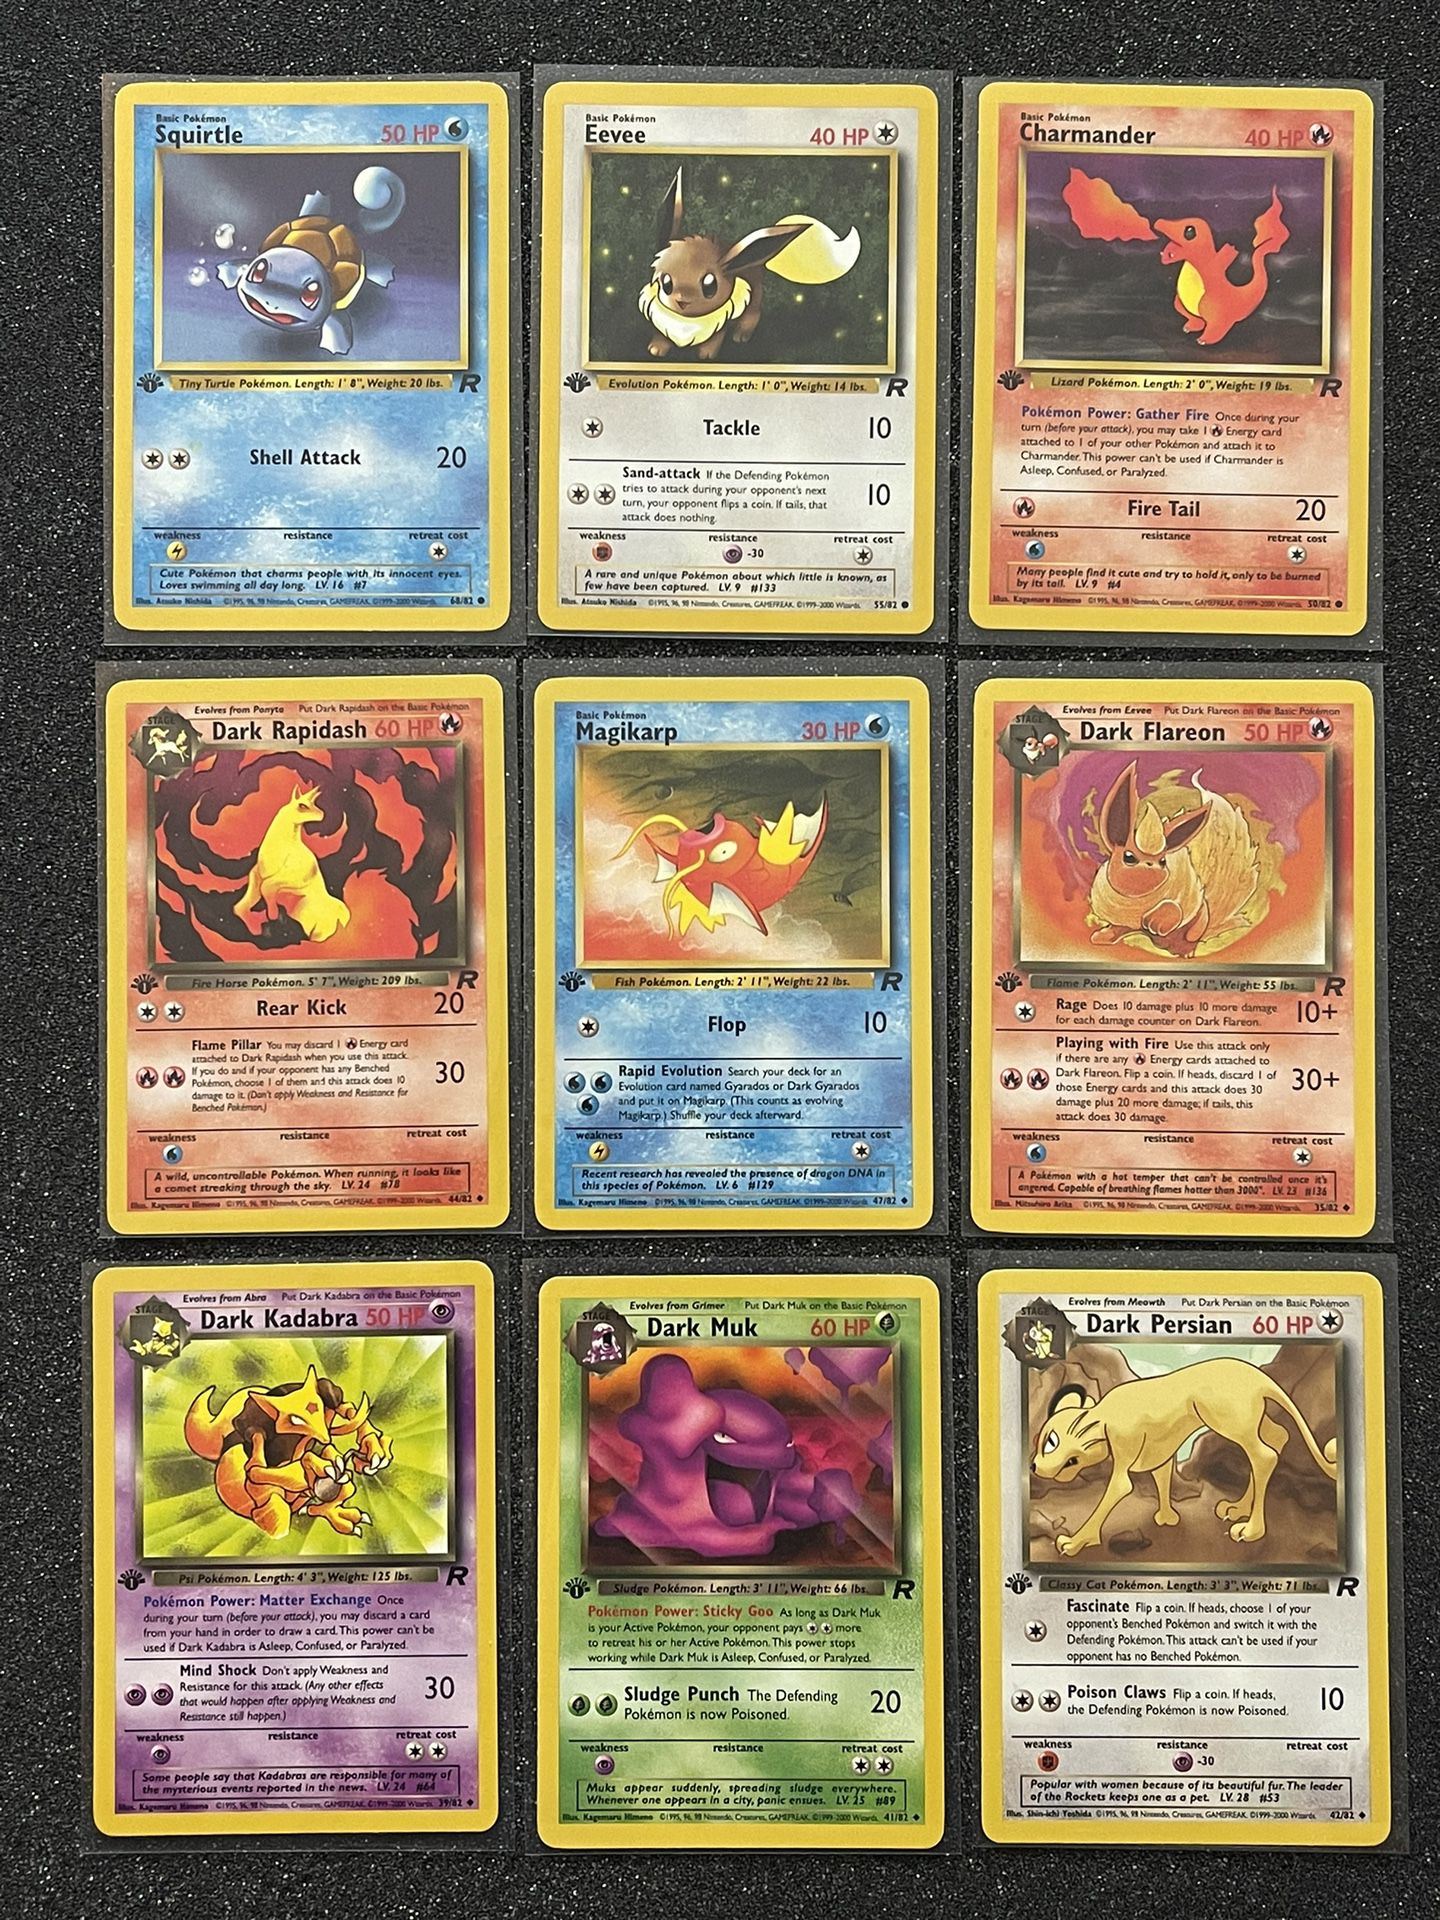 1st Edition Team Rocket • Pokemon Card Collection • 27 Cards 👾